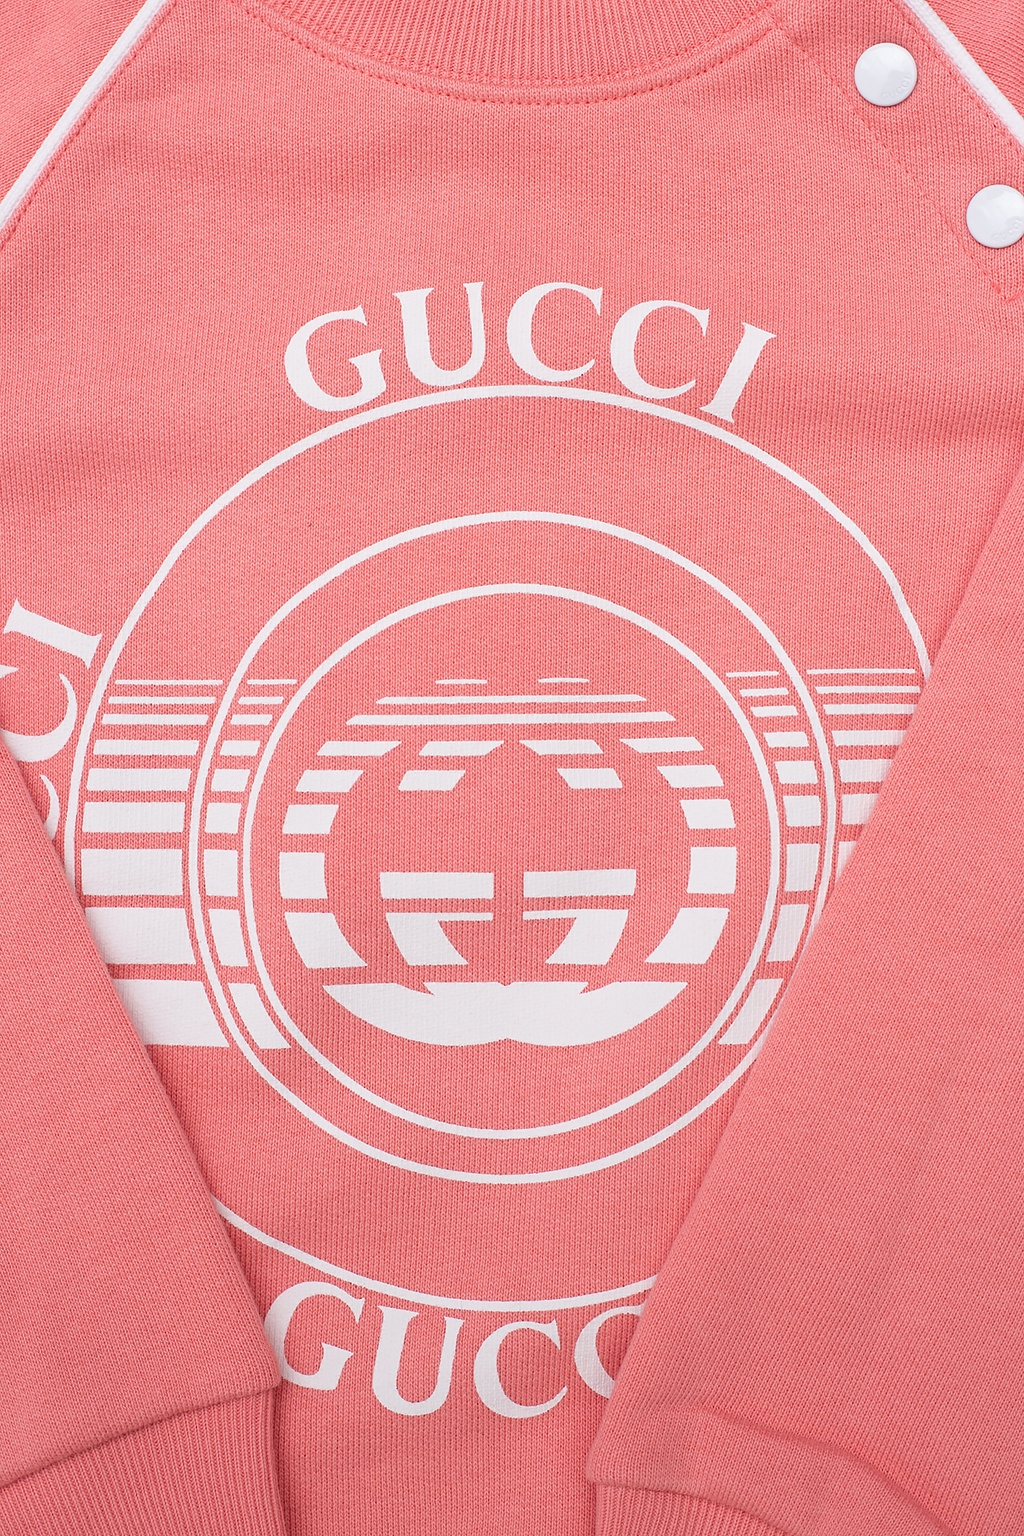 Gucci Kids Jumpsuit with logo, Kids's Baby (0-36 months)